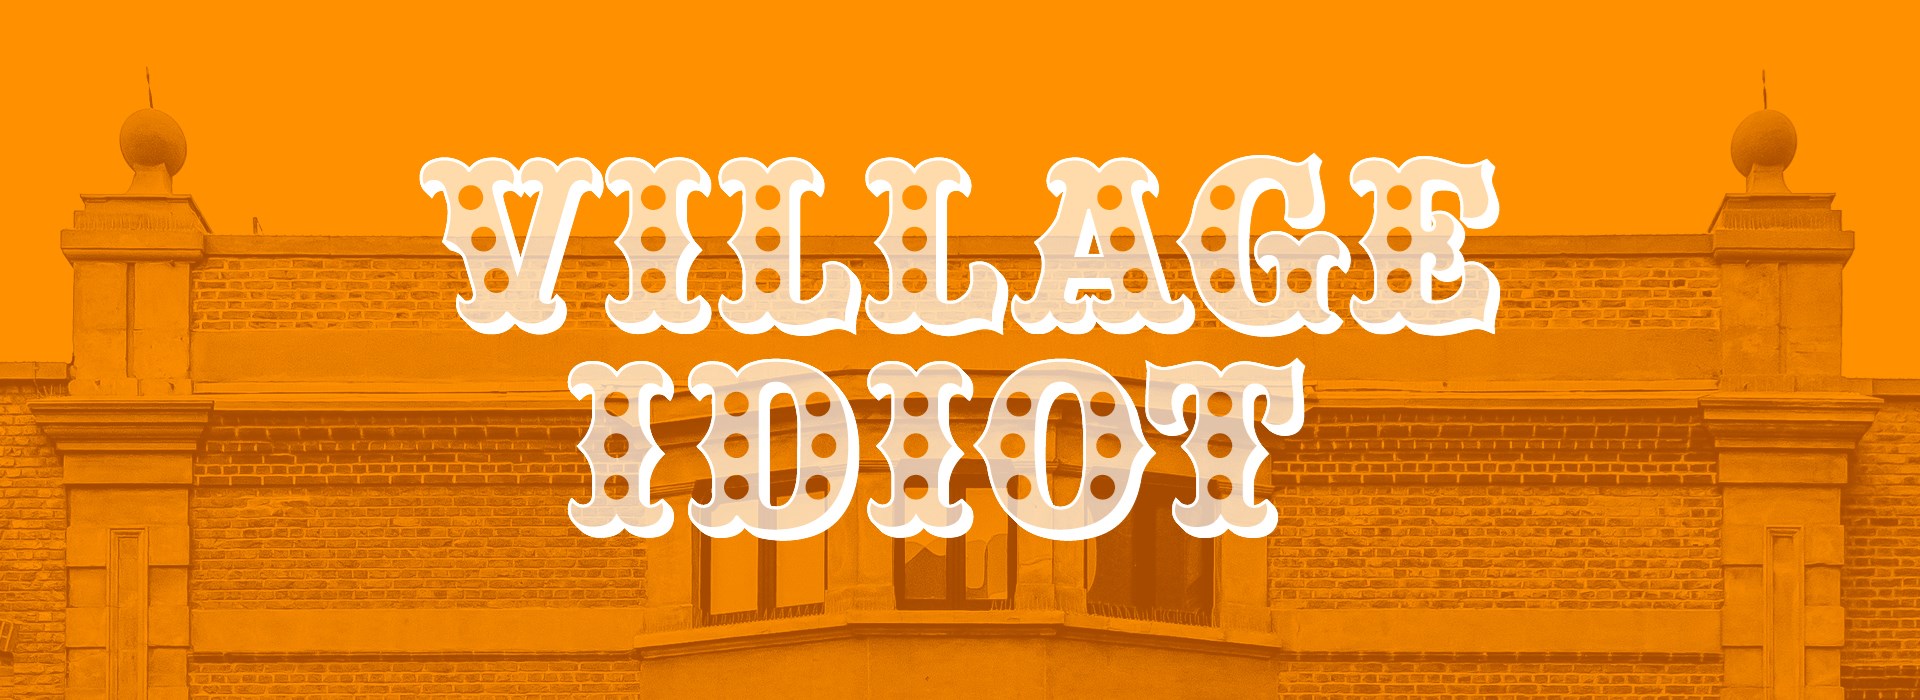 A photo of a grand building, like a town hall, is bathed beneath an orange colour, the words 'Village Idiot' written over the top in an old-fashioned white font.